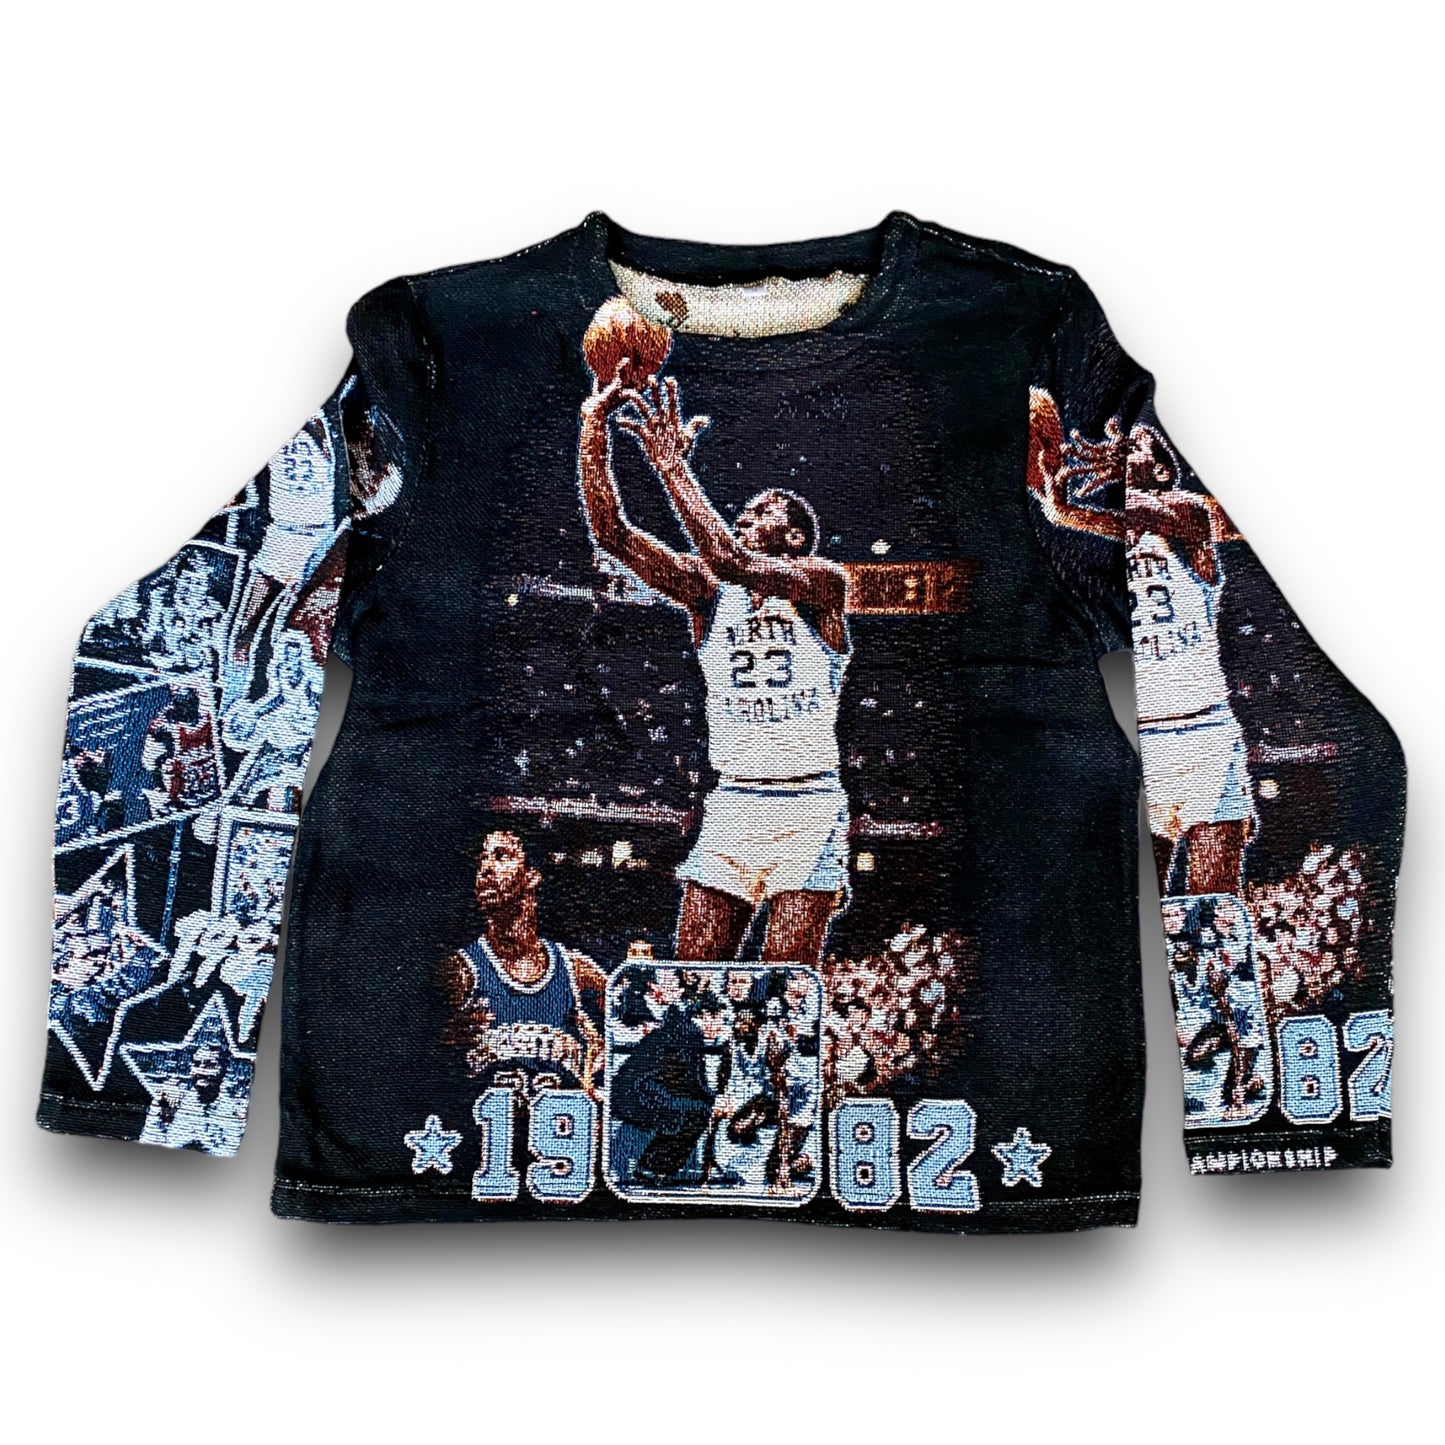 UNC Jordan Tribute Knitted Pullover Sweater *LIMITED EDITION*